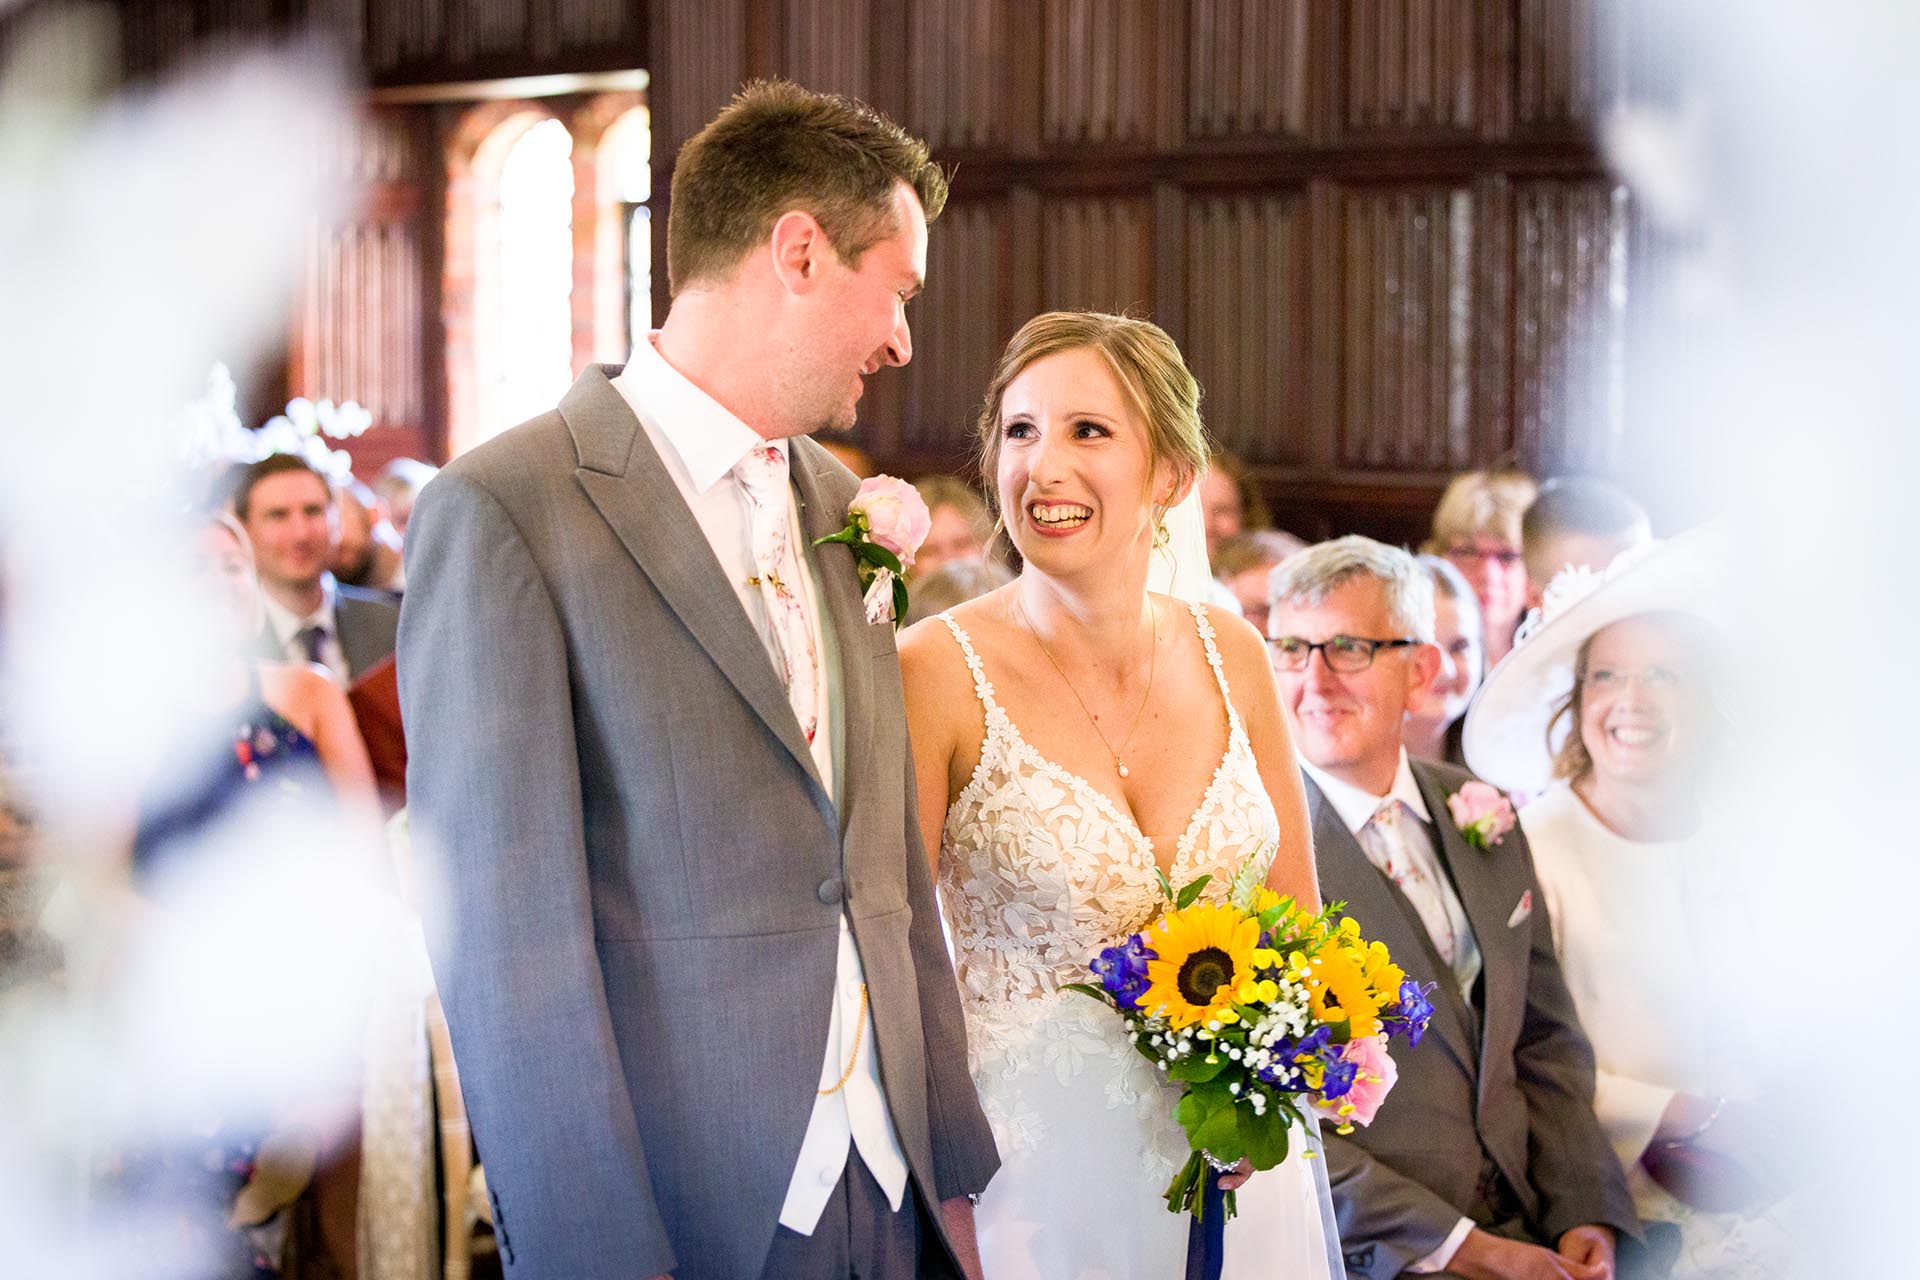 Bride and groom during their wedding ceremony at Leez Priory, Great Leighs, Chelmsford by Essex wedding photographer